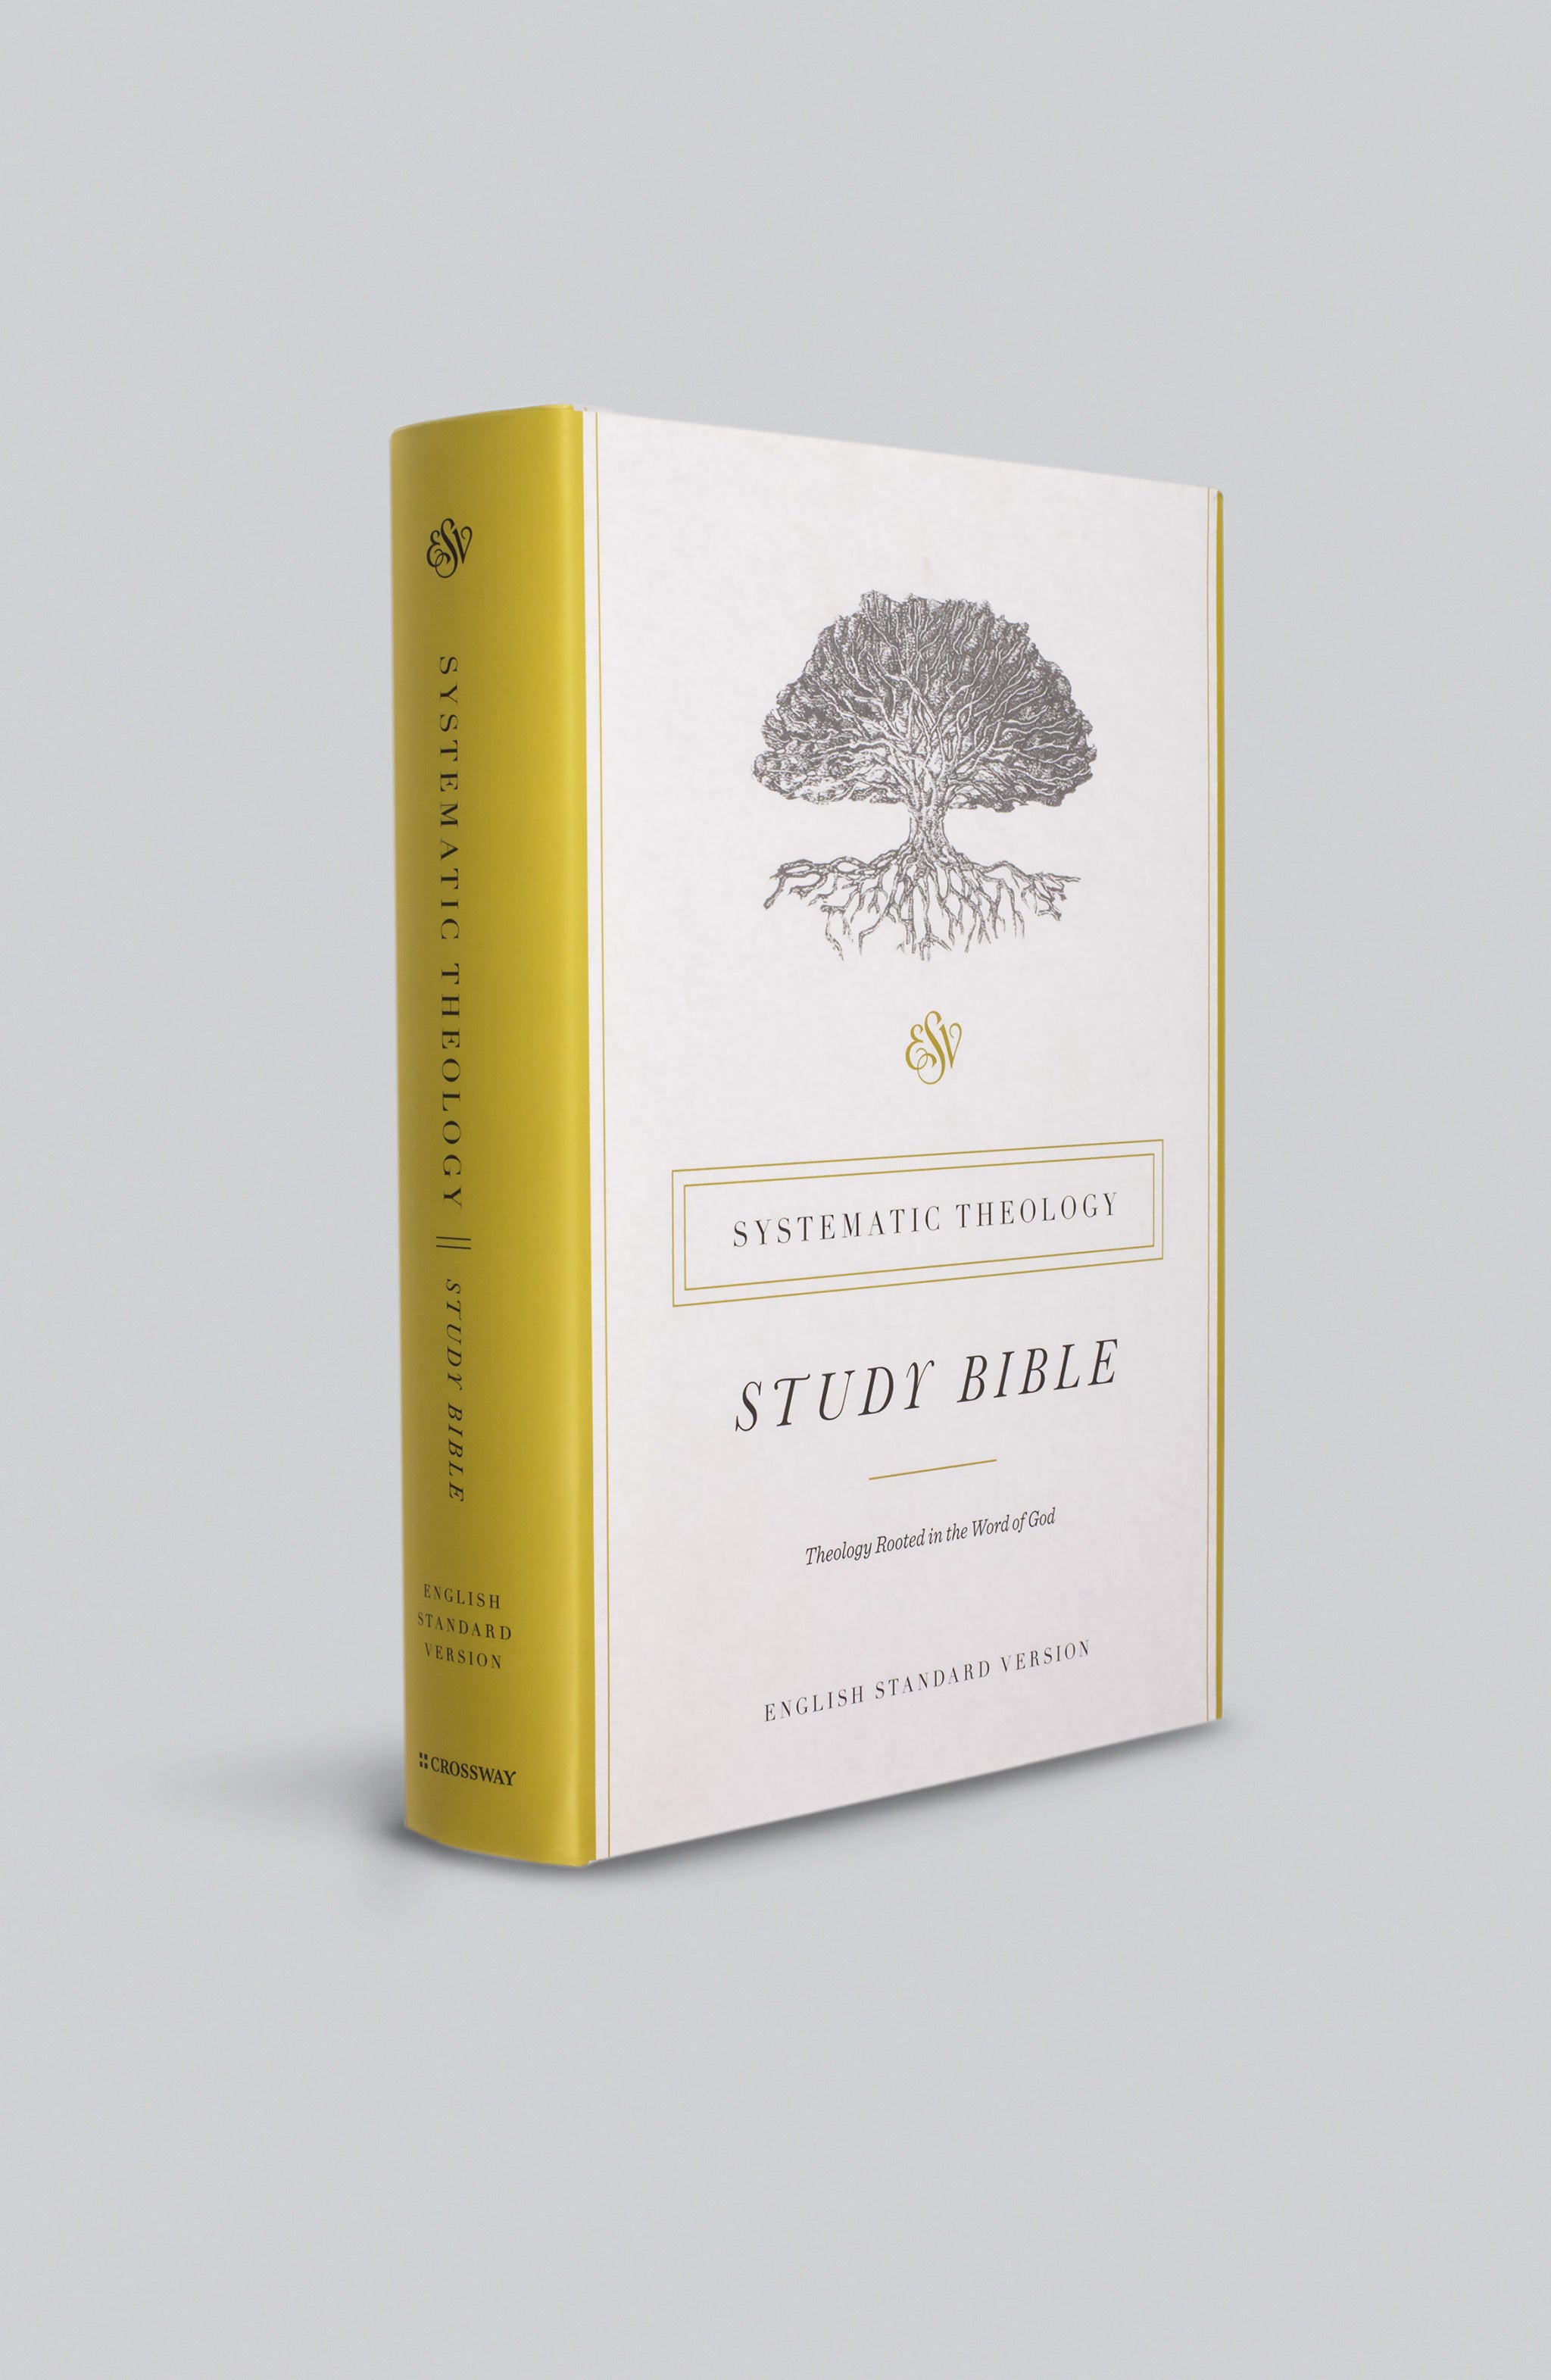 Image of ESV Systematic Theology Study Bible, Cream, Hardback, Doctronical Sidebars, Topical Index, Articles, Book Introductions, Theological Articles other